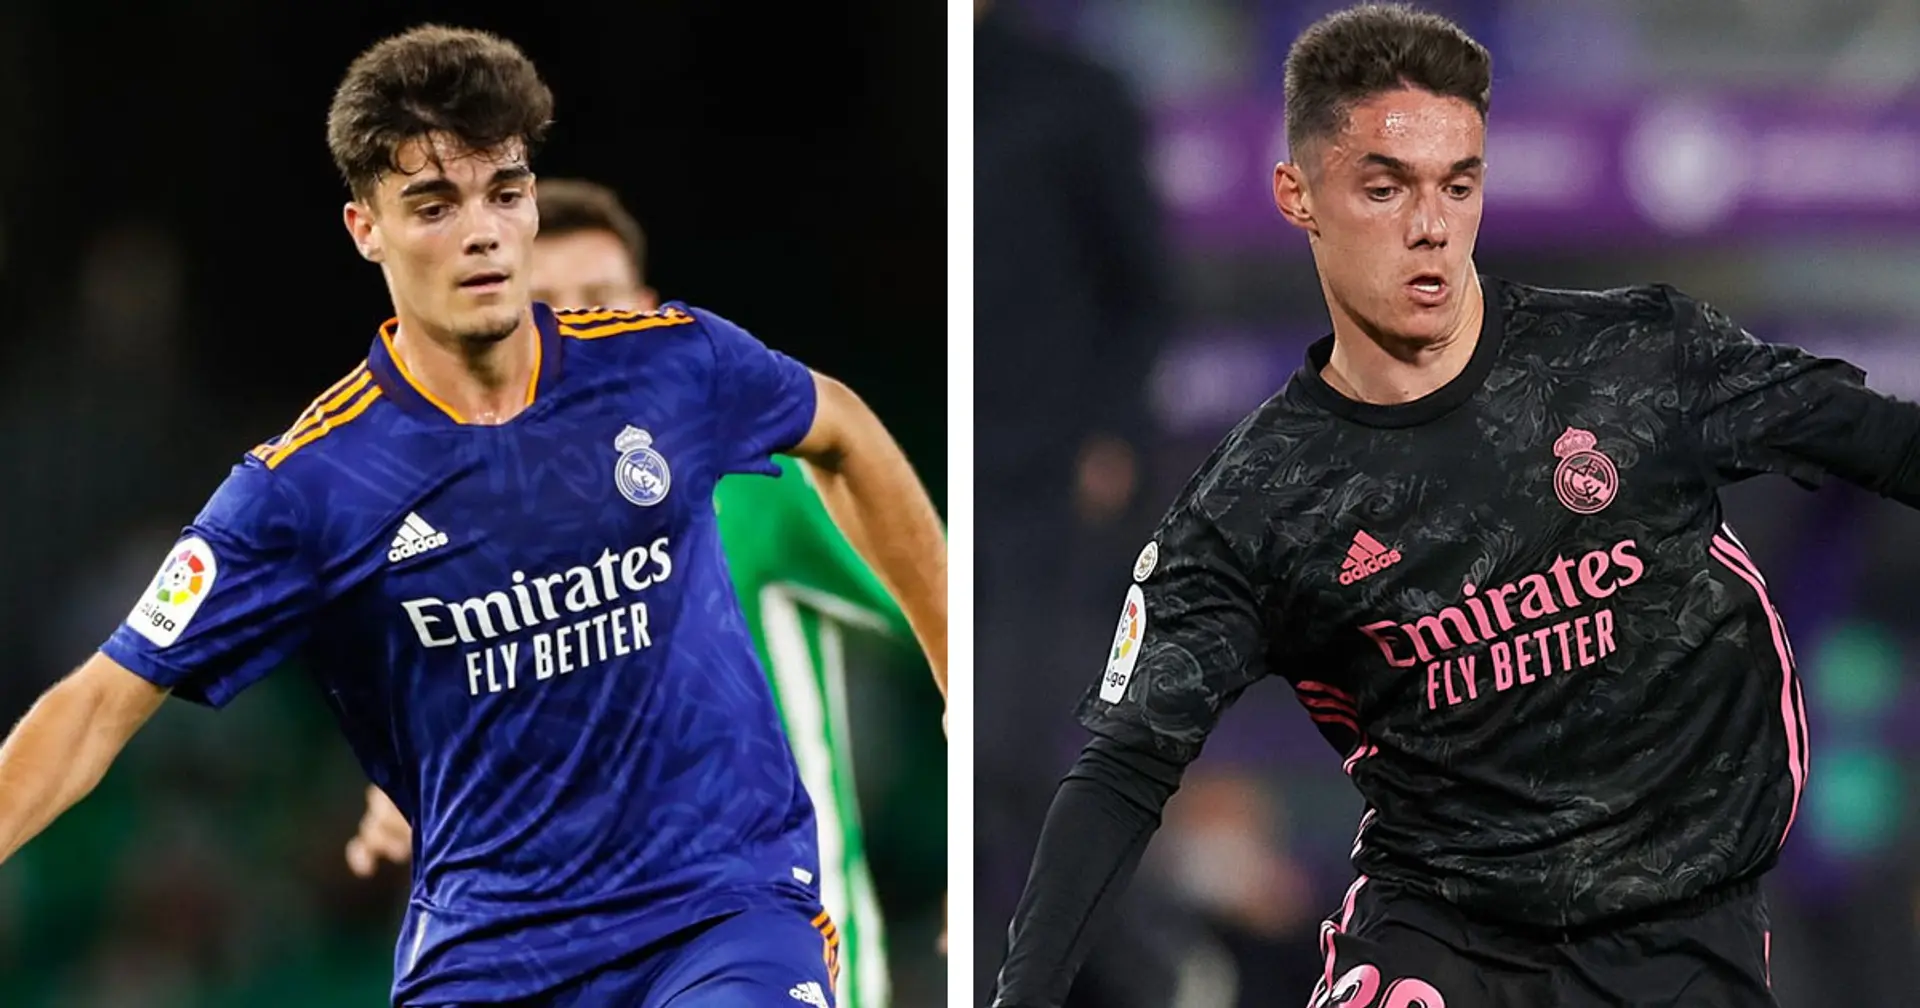 Real Madrid renew contracts of talented youngsters Miguel and Arribas on improved terms (reliability: 5 stars)